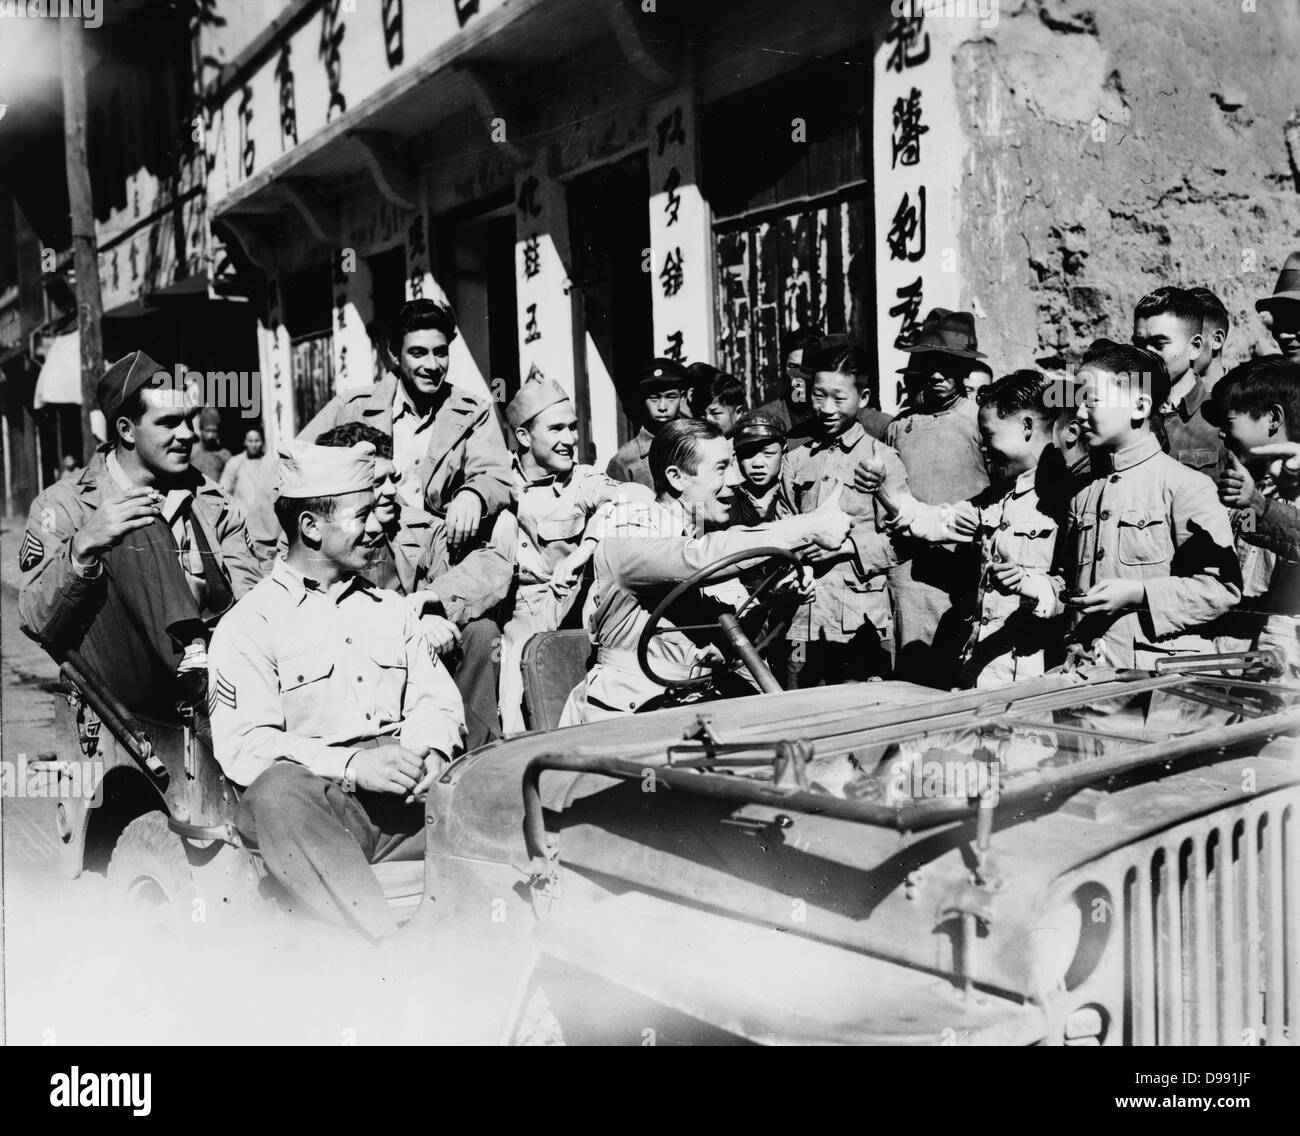 Joe E Brown (1892-1973) American actor and comedian driving jeep loaded with American GIs seeing the sights in China. Brown giving thumbs up sign to Chinese children, 1942 or 1943. Stock Photo